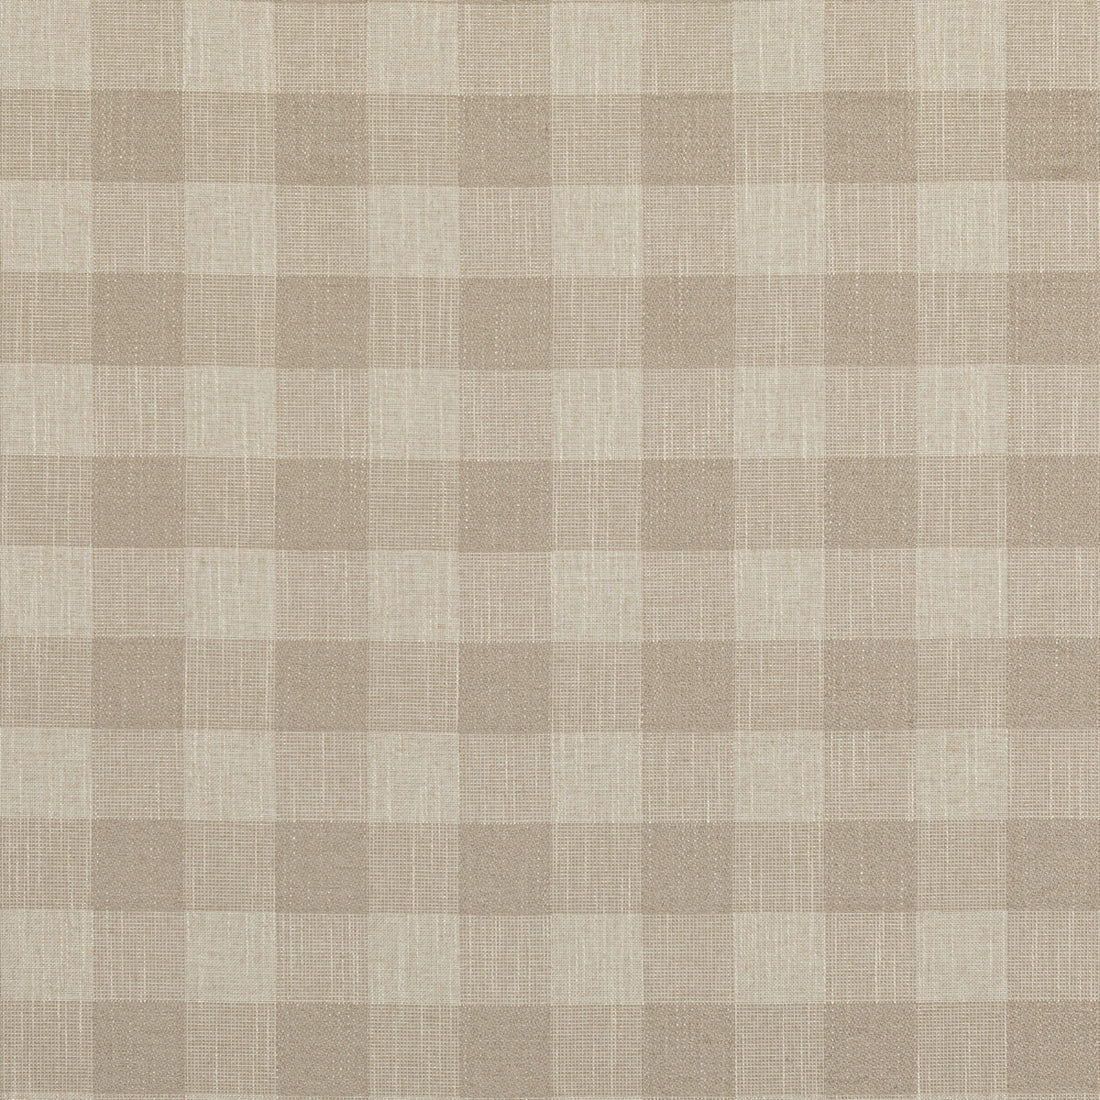 Block Check fabric in stone color - pattern PF50490.140.0 - by Baker Lifestyle in the Block Weaves collection